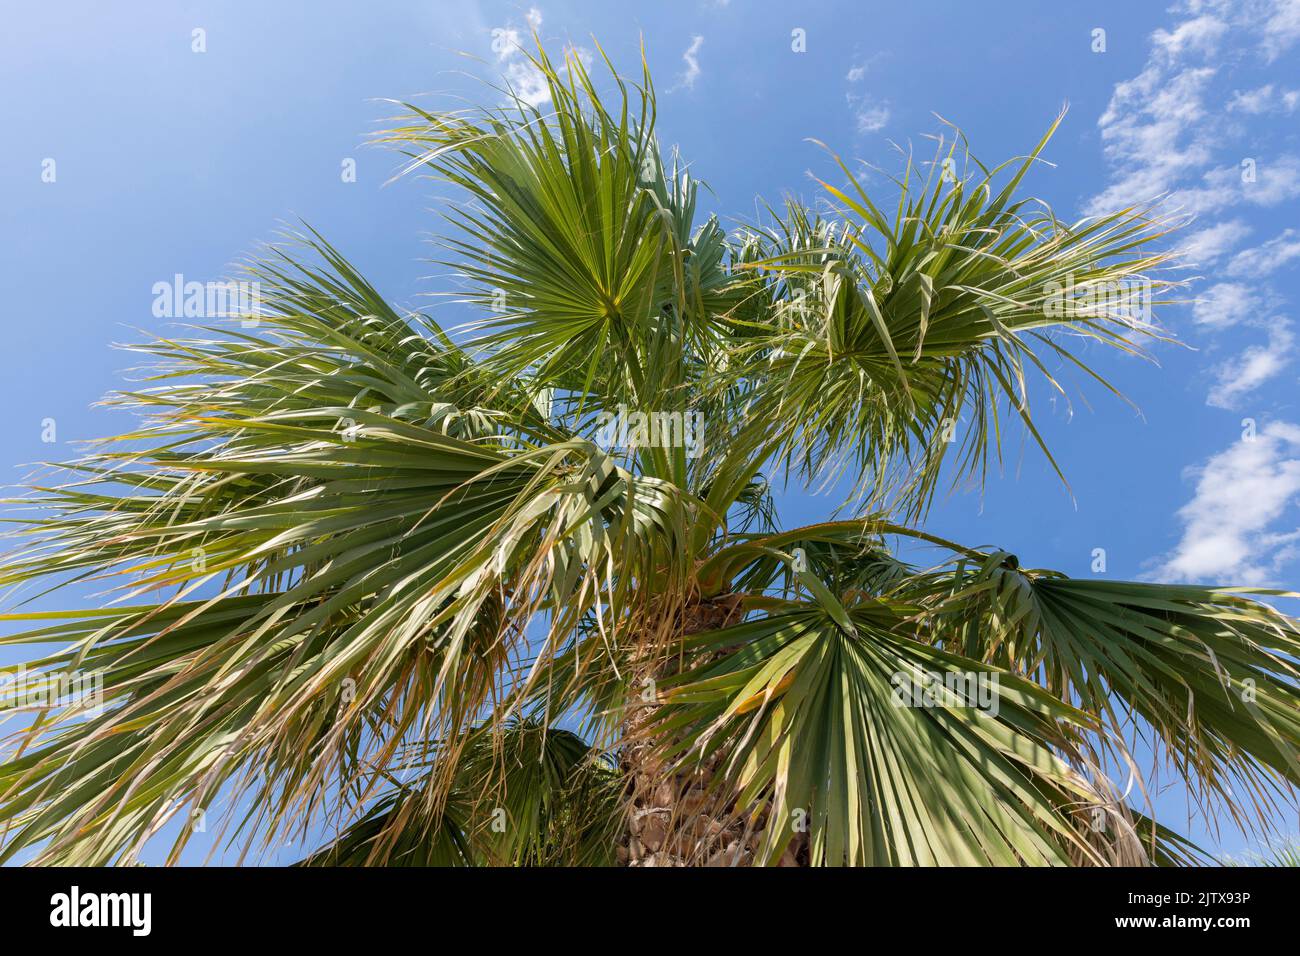 Palm tree leaves against bright blue sky. Tree Canopy. Stock Photo